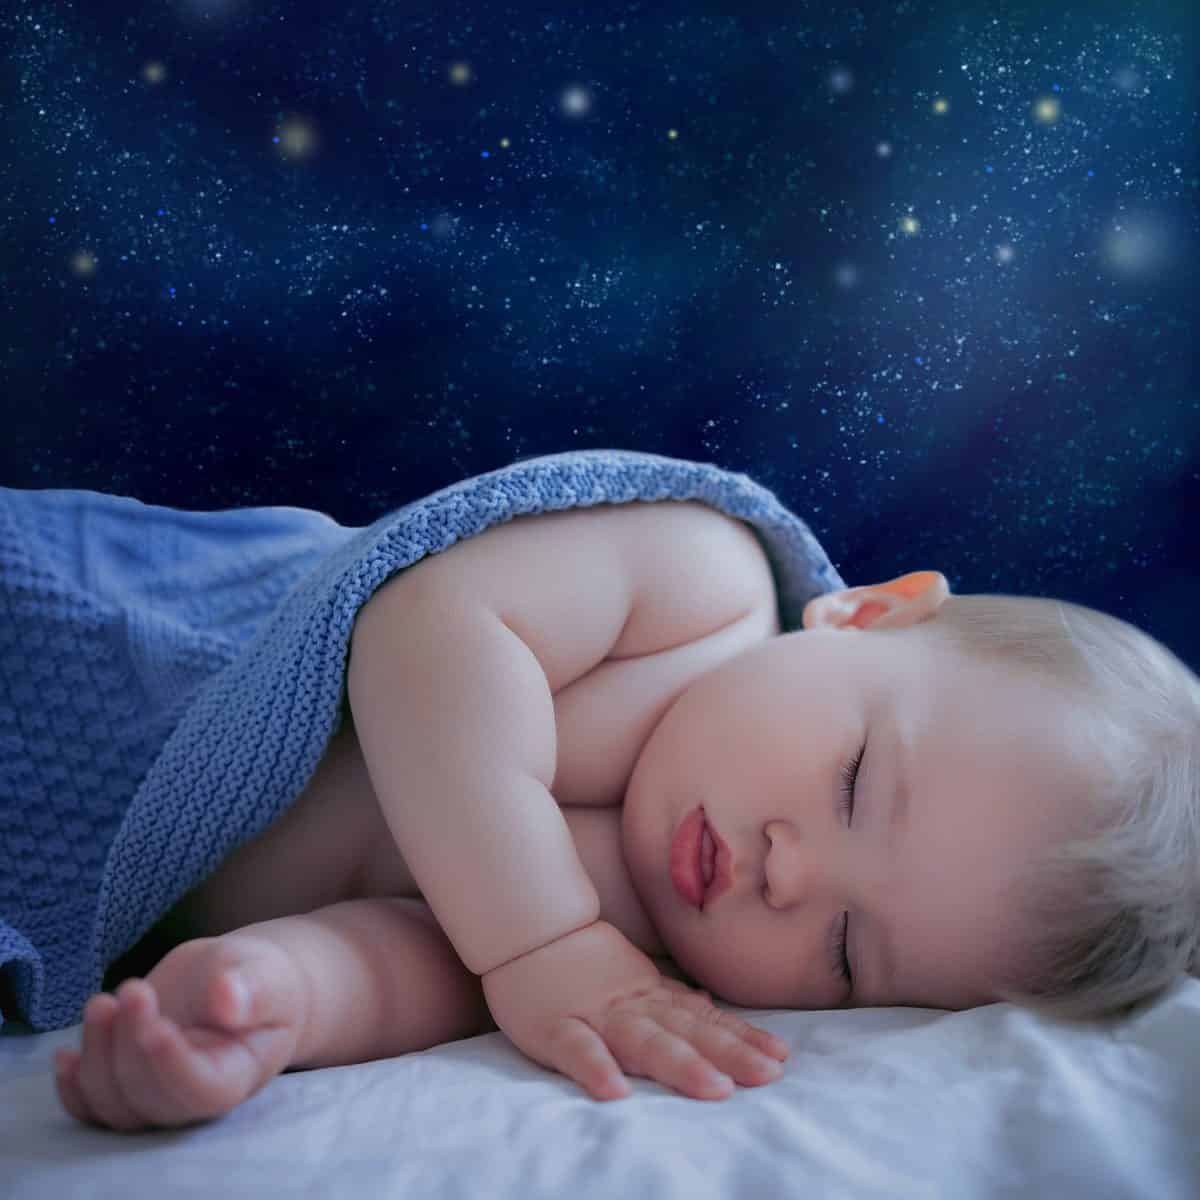 cute baby 1 year old sleeping on the background of the starry sky or space, good night and magical dreams concept